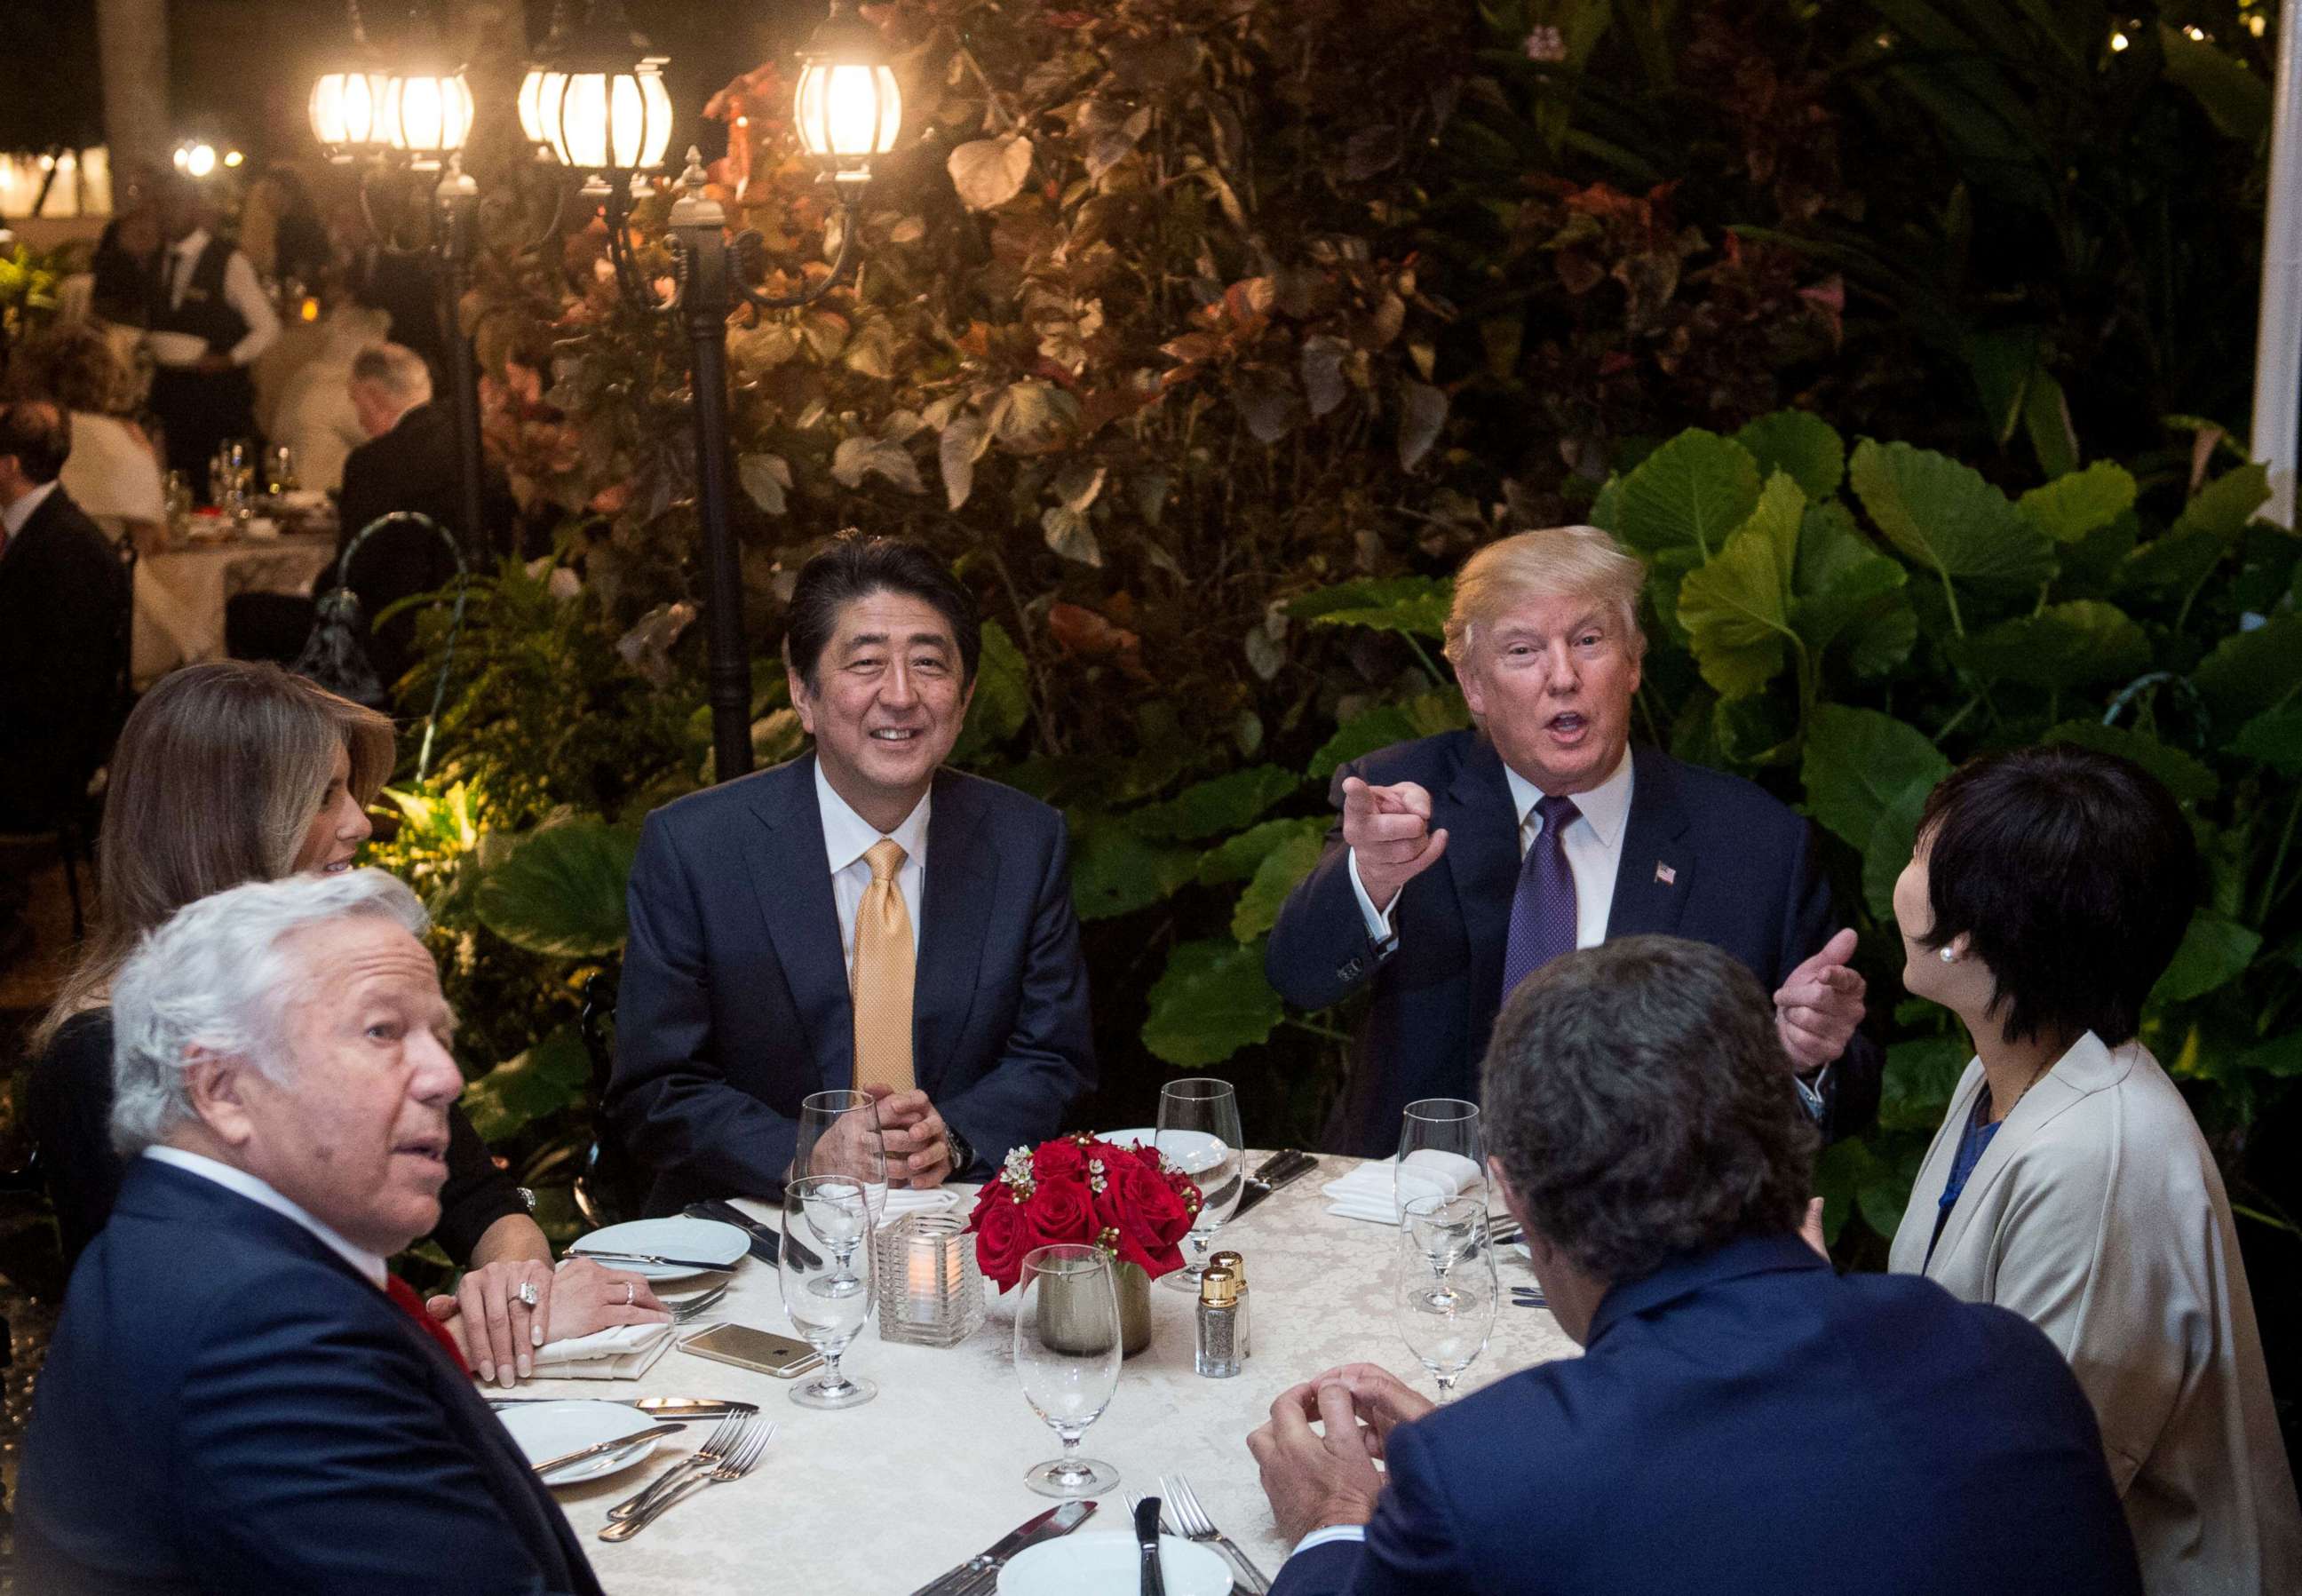 PHOTO: President Donald Trump, Japanese Prime Minister Shinzo Abe, and his wife Akie Abe, first lady Melania Trump and Robert Kraft sit down for dinner at Trump's Mar-a-Lago resort, Feb. 10, 2017.